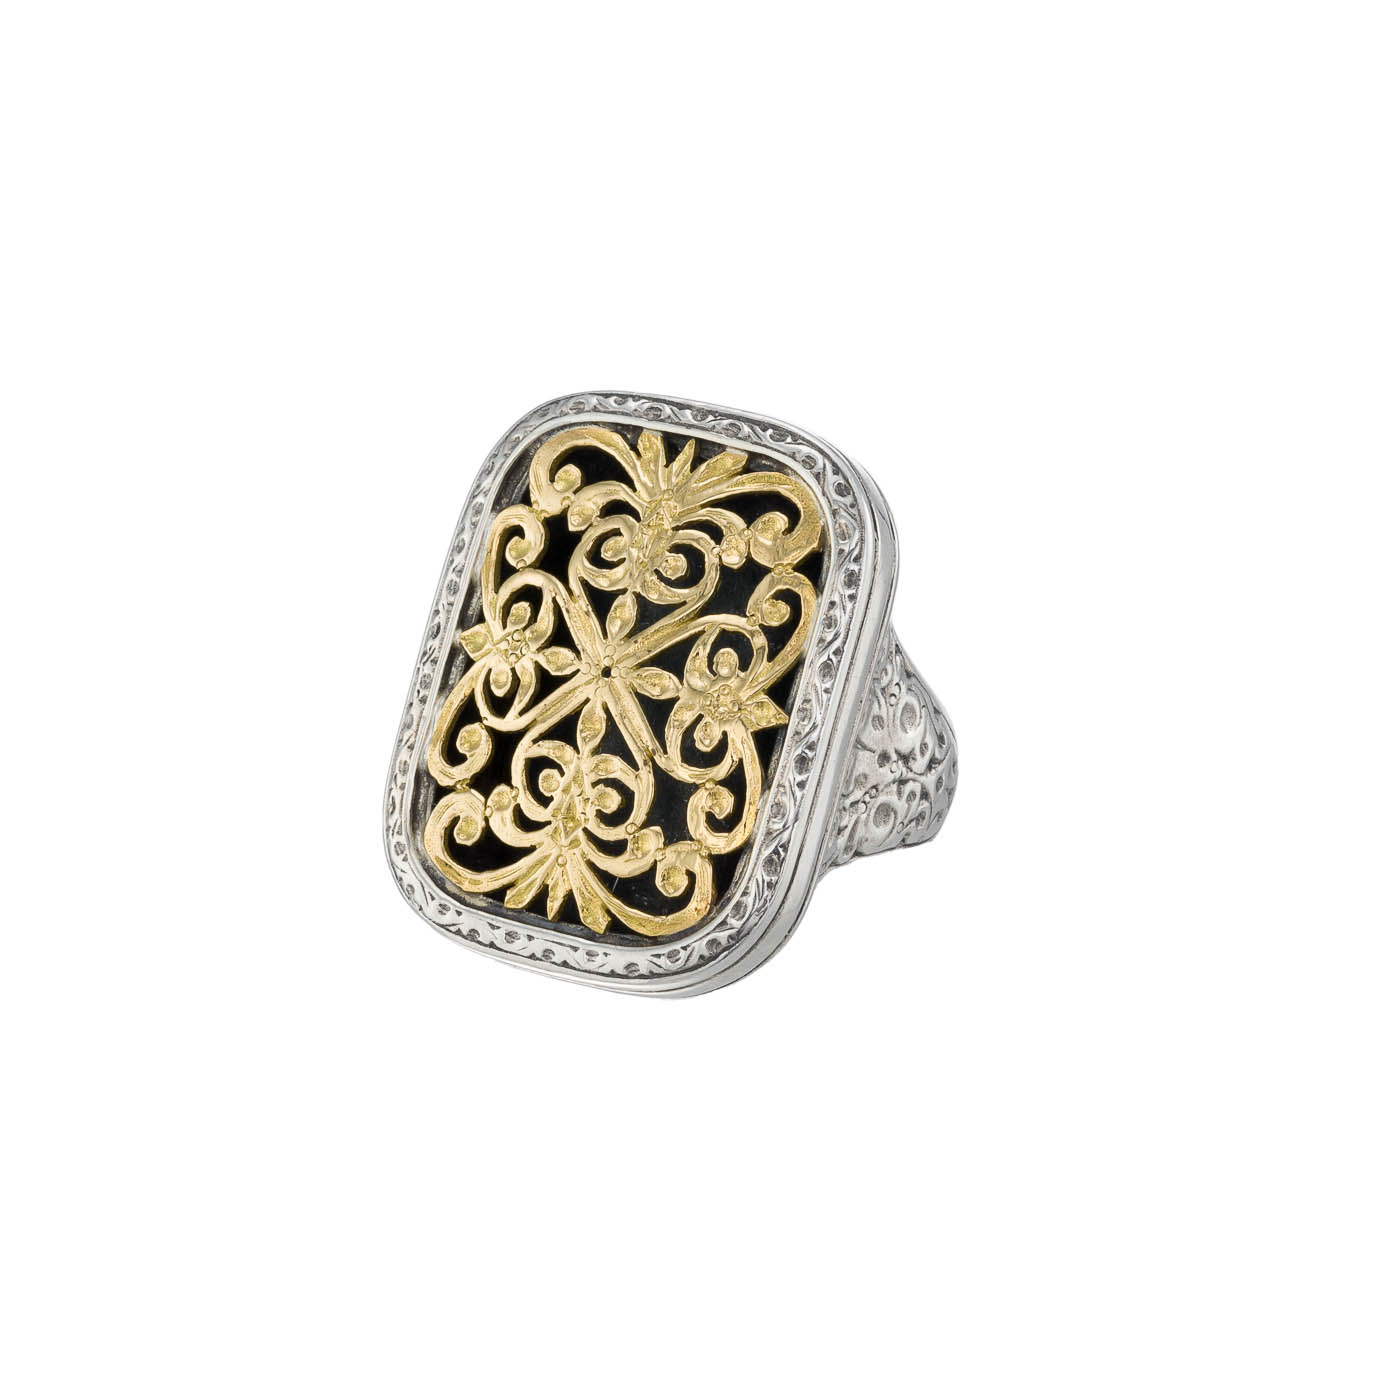 Garden shadows big ring in 18K Gold and Sterling Silver